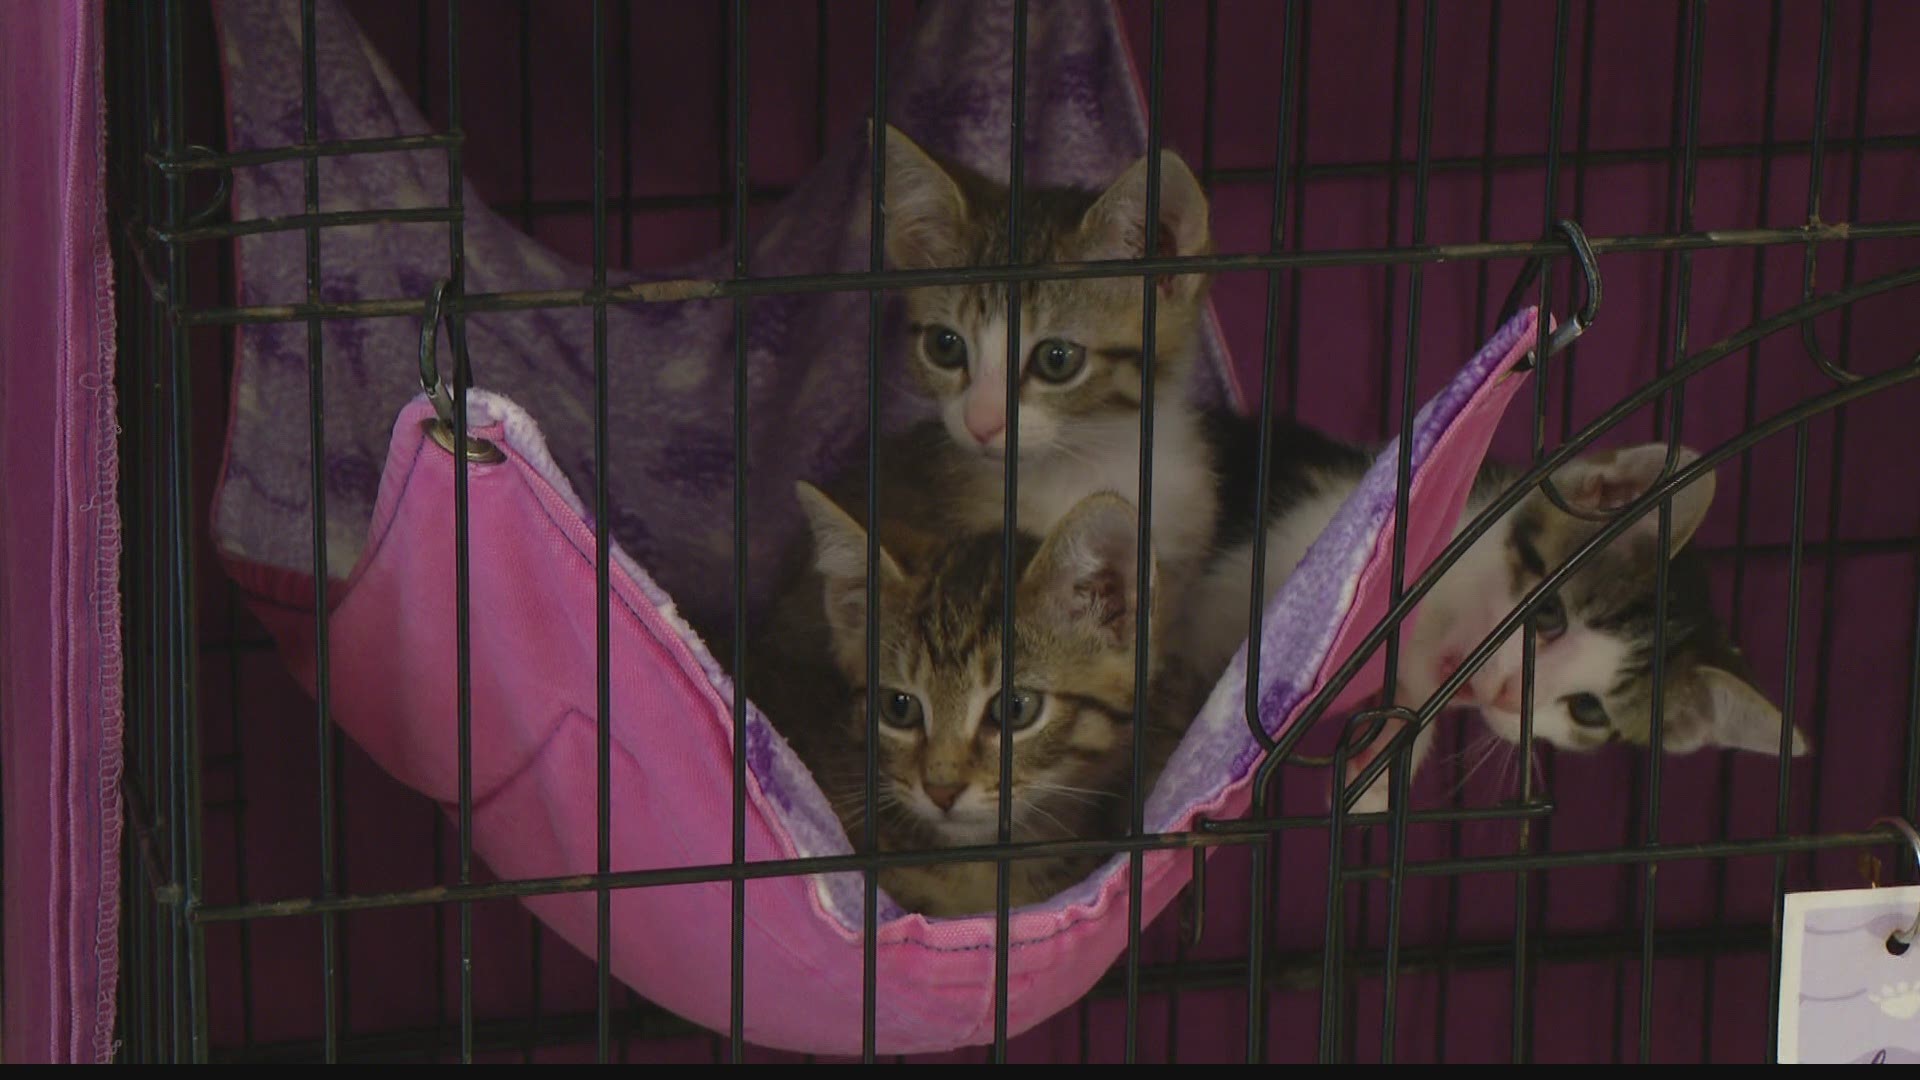 This weekend the Indy Humane Society is hoping to find good homes for some kittens.